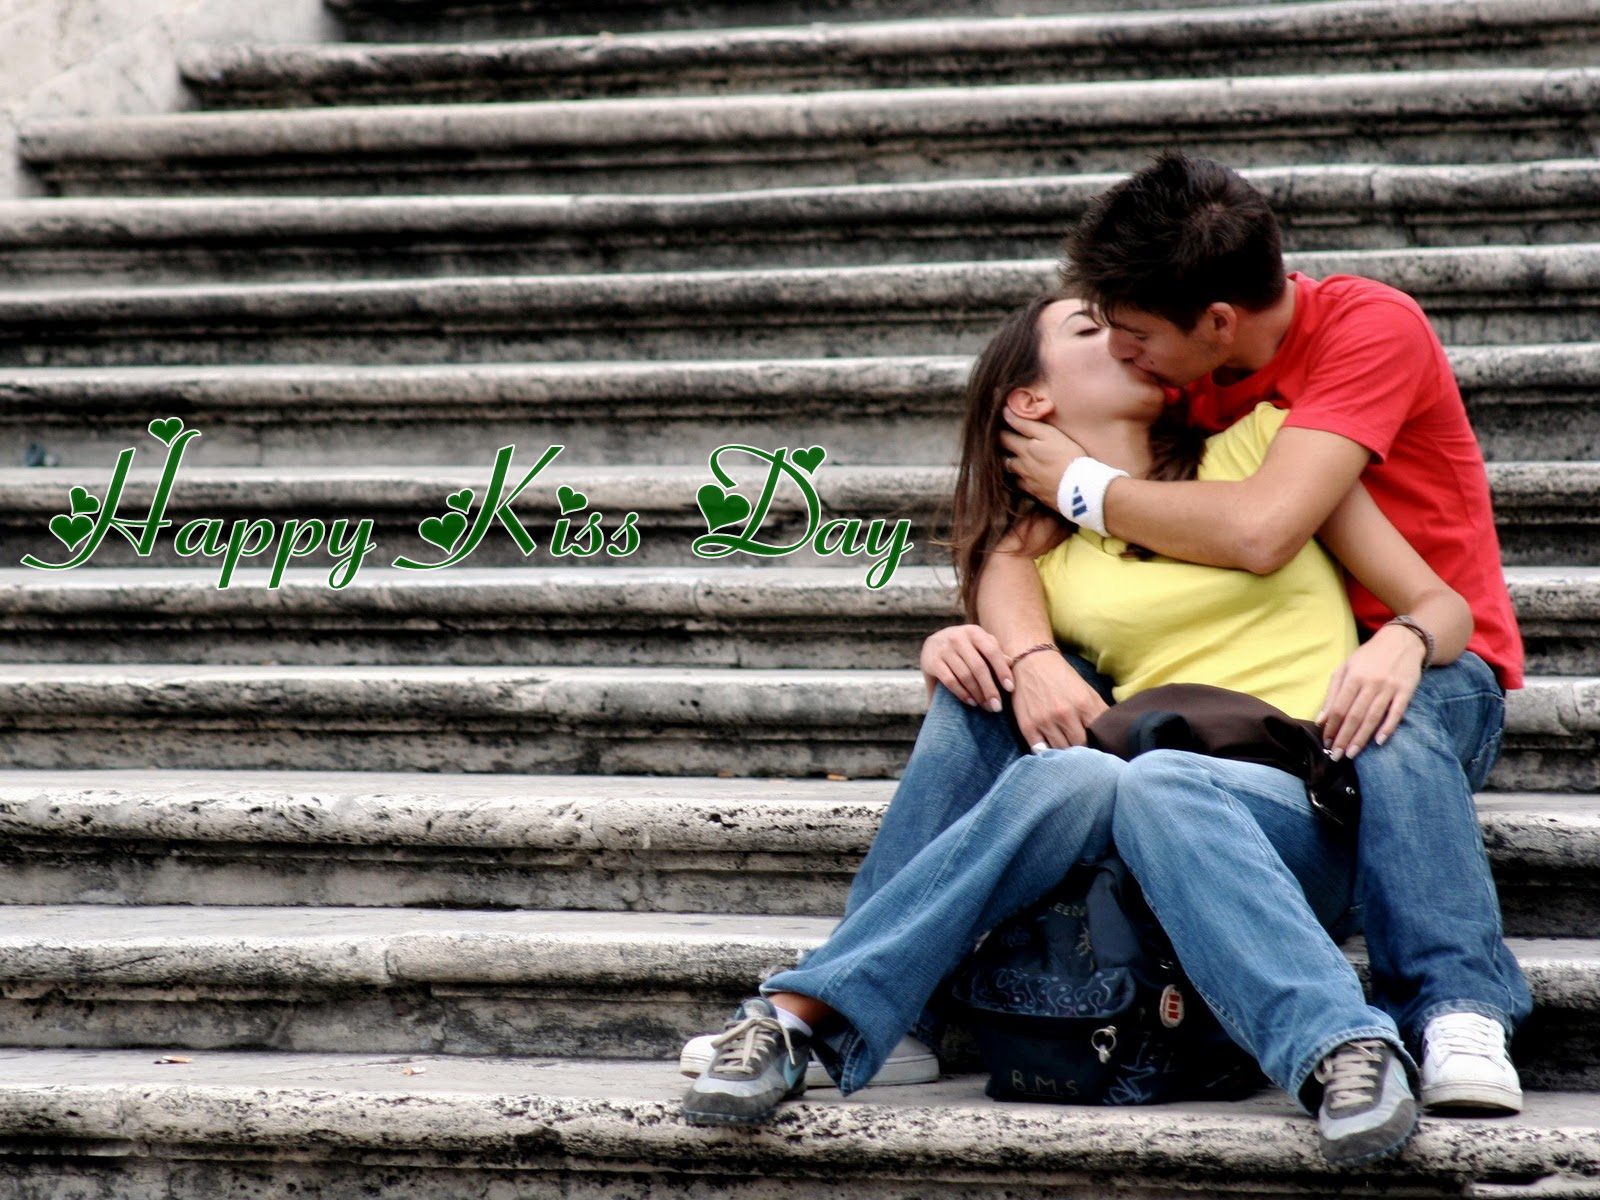 Happy Kiss Day 2021 Quotes Wishes Messages Sms Funny Memes Whatsapp Status Dp Images